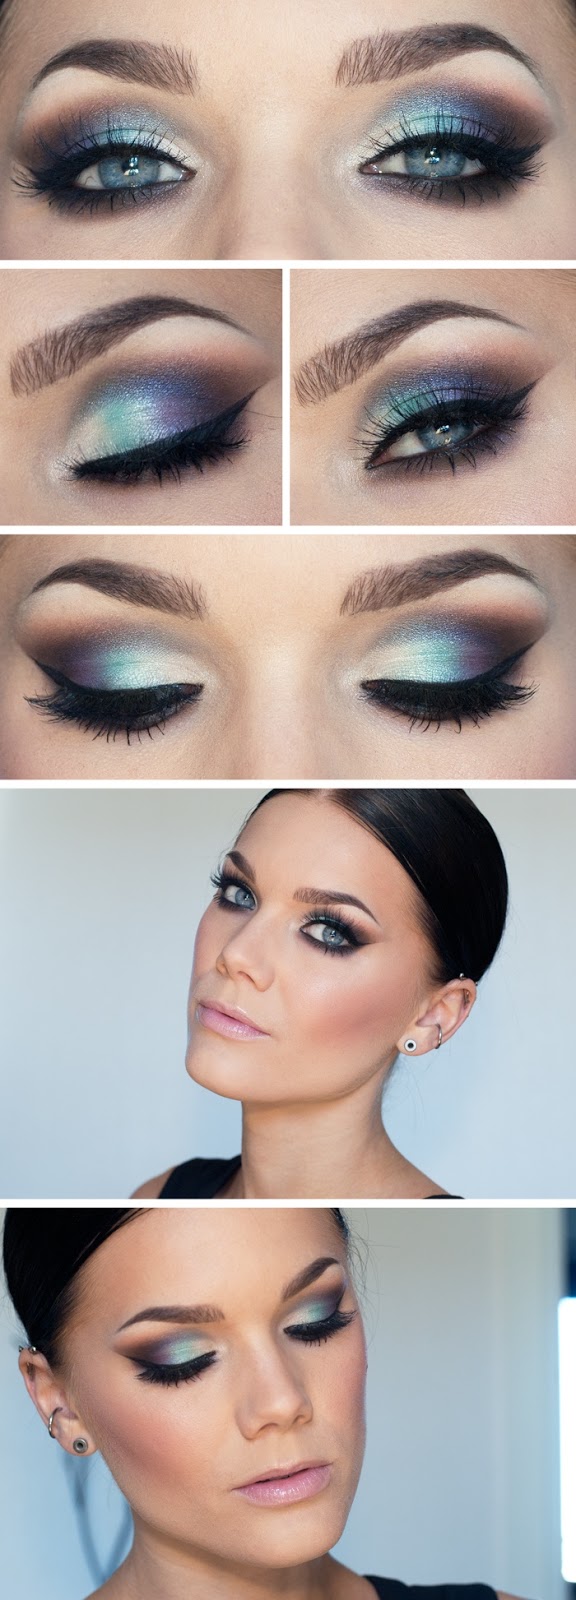 The Bloomin' Couch: Some awesome makeup looks